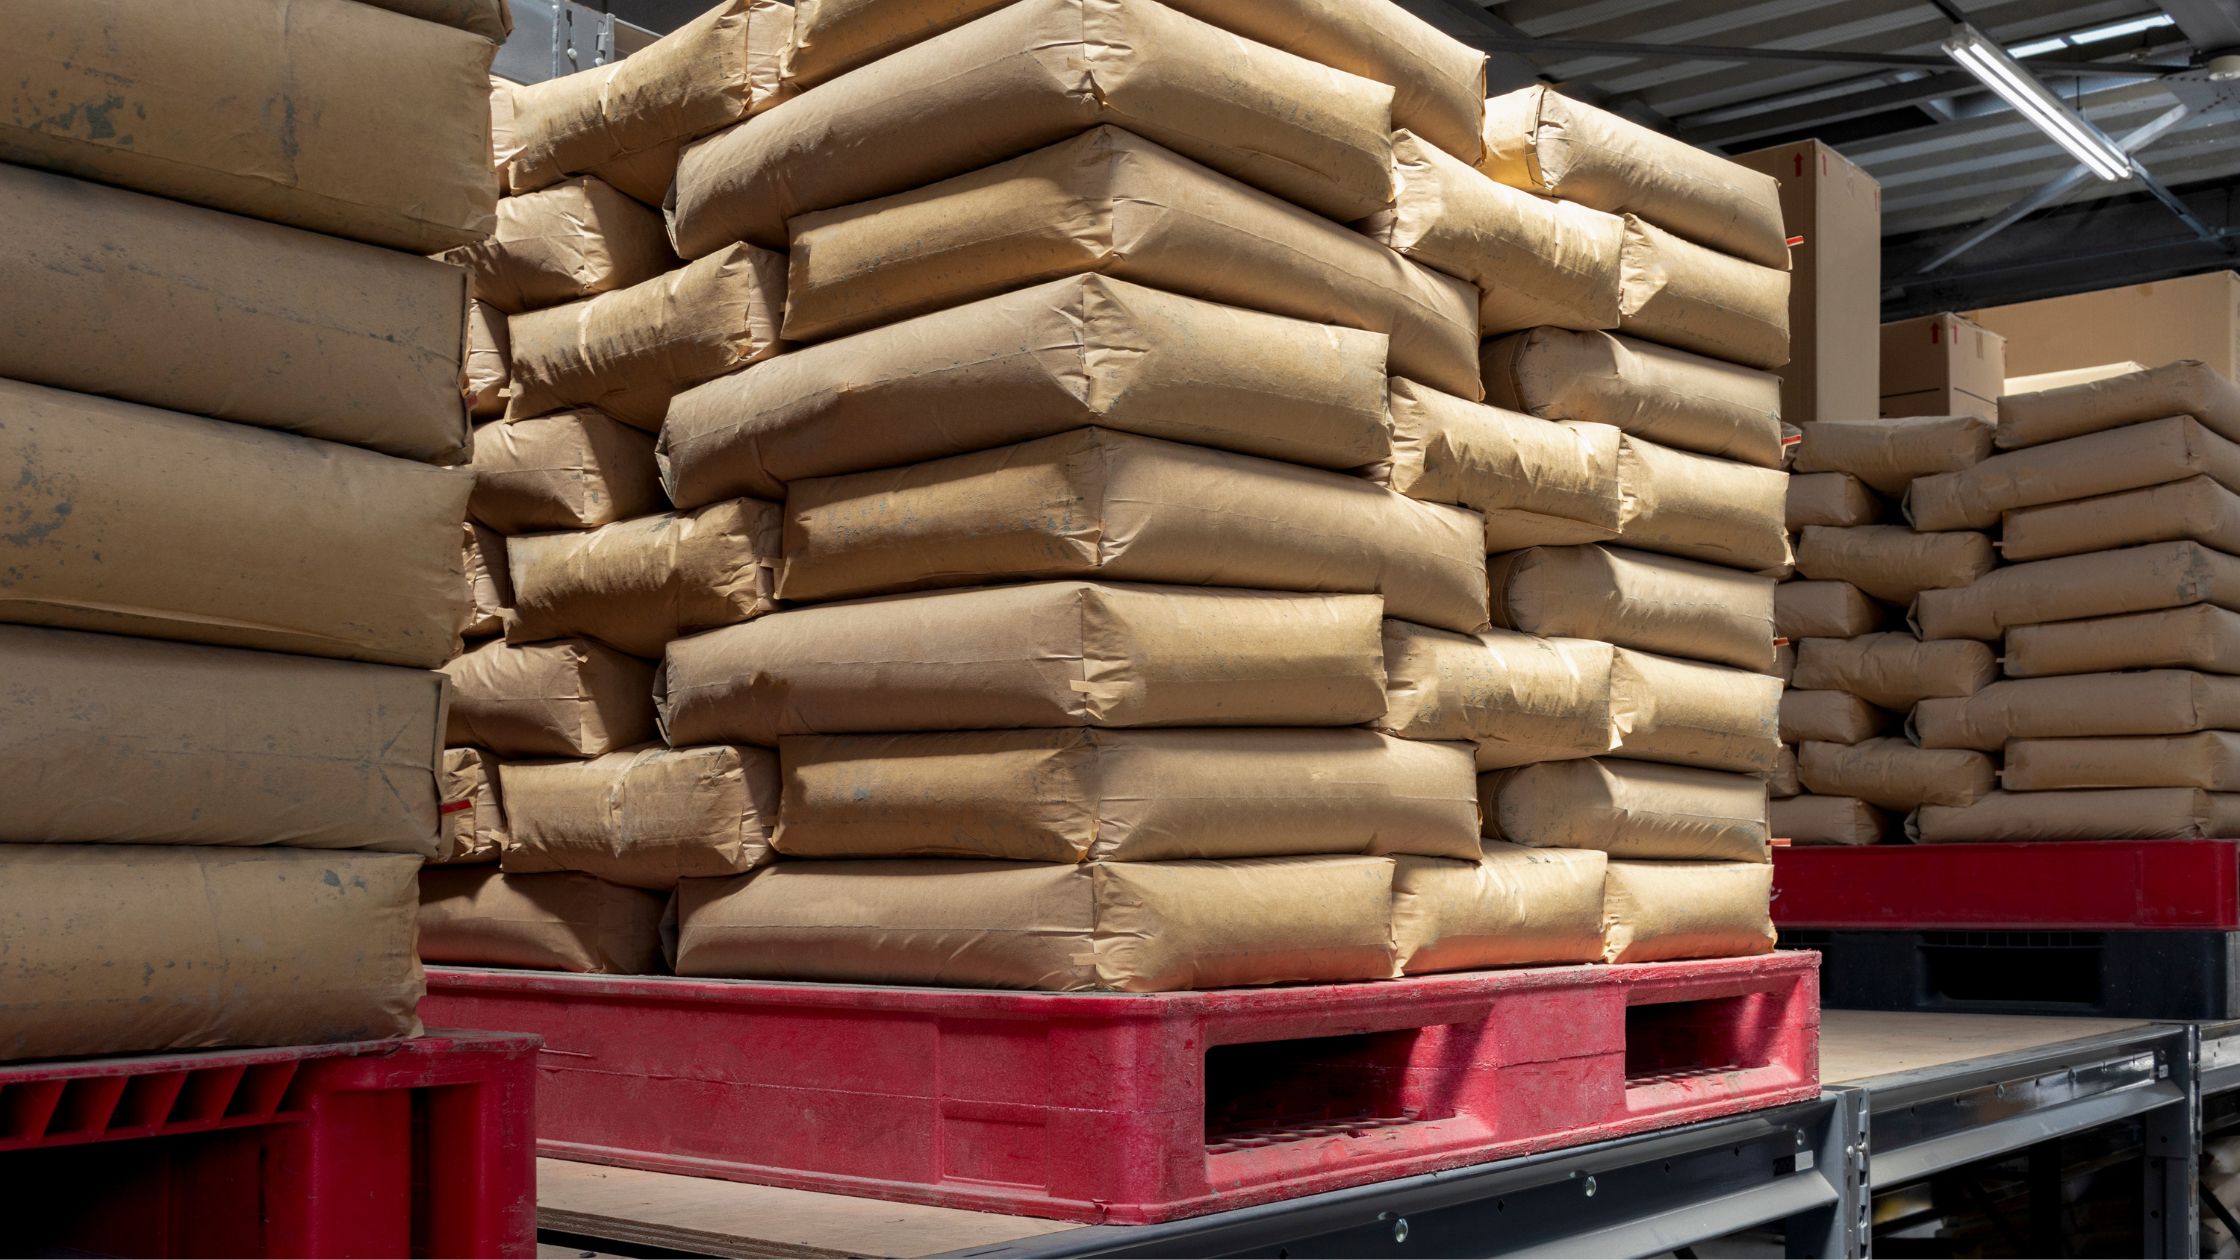 Sacks stacked on red pallets